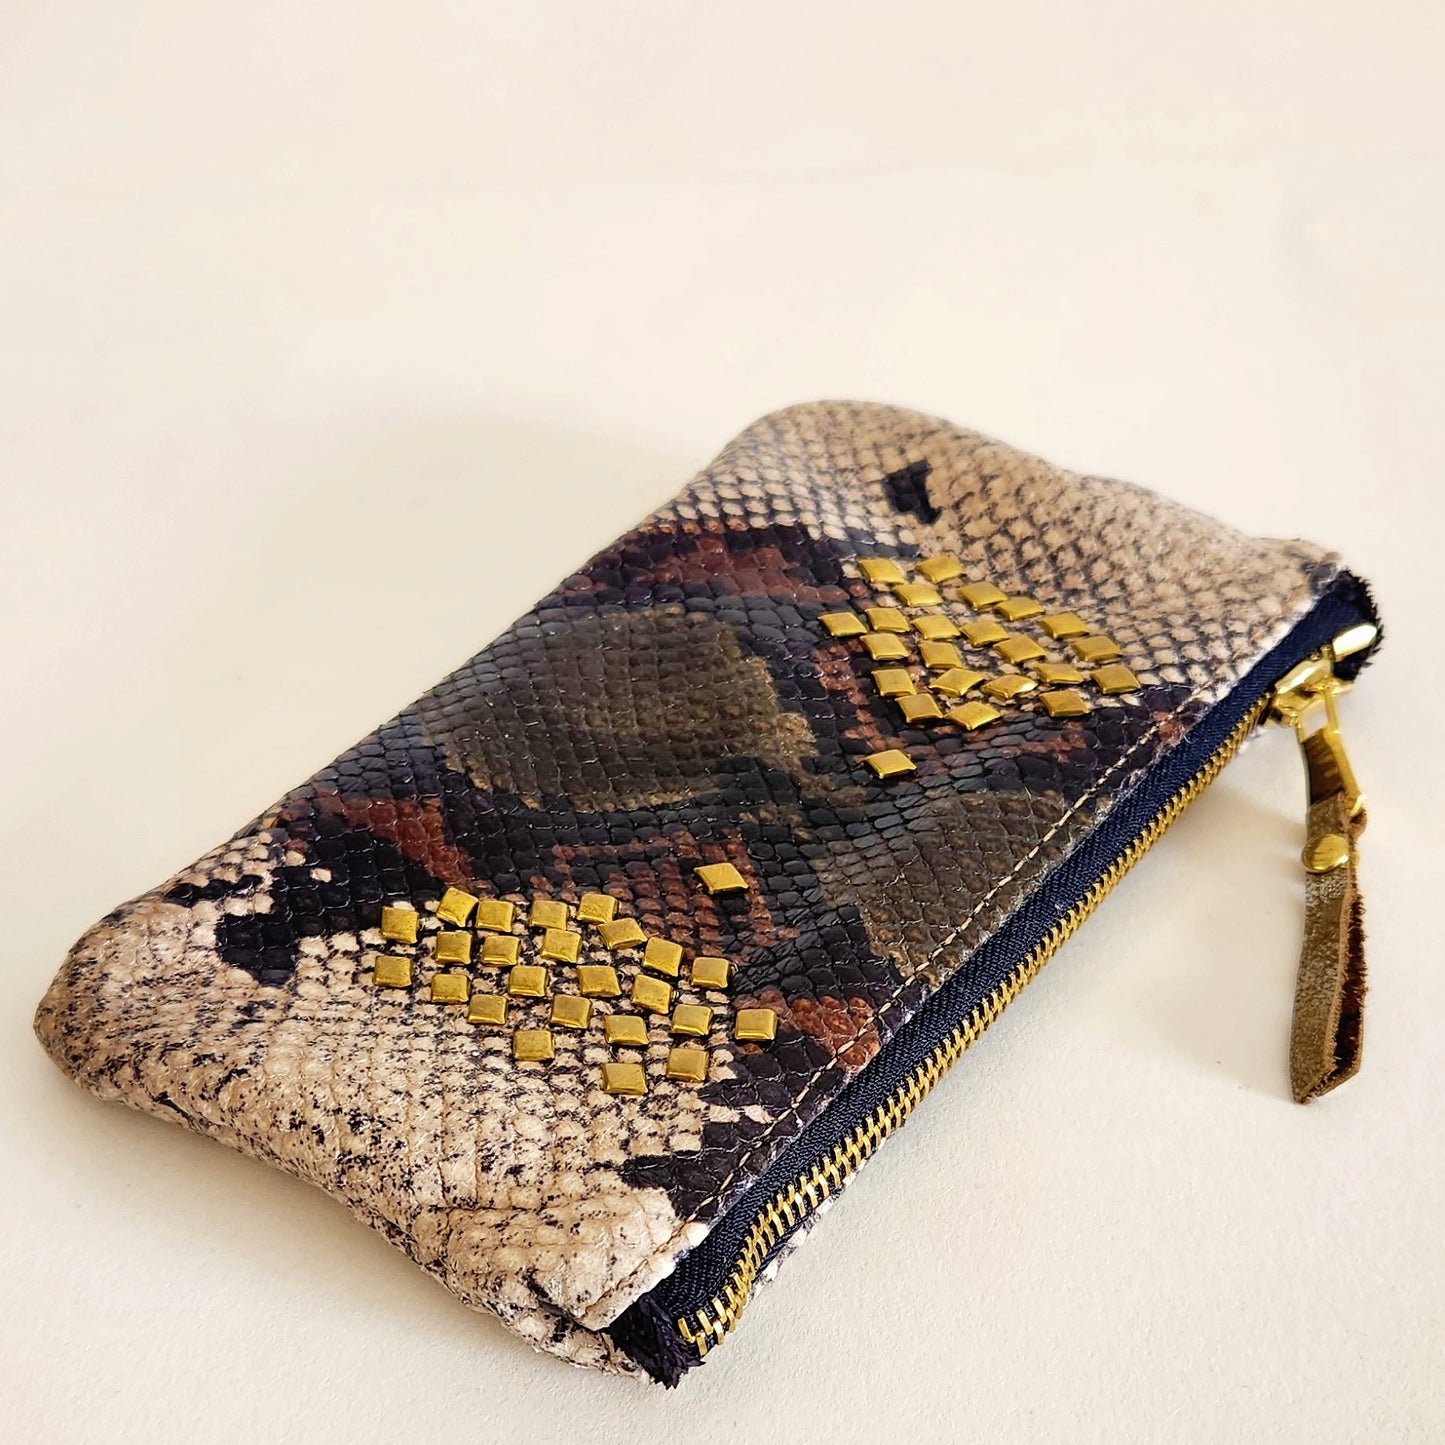 Embellished Snake Print Mini Pouch